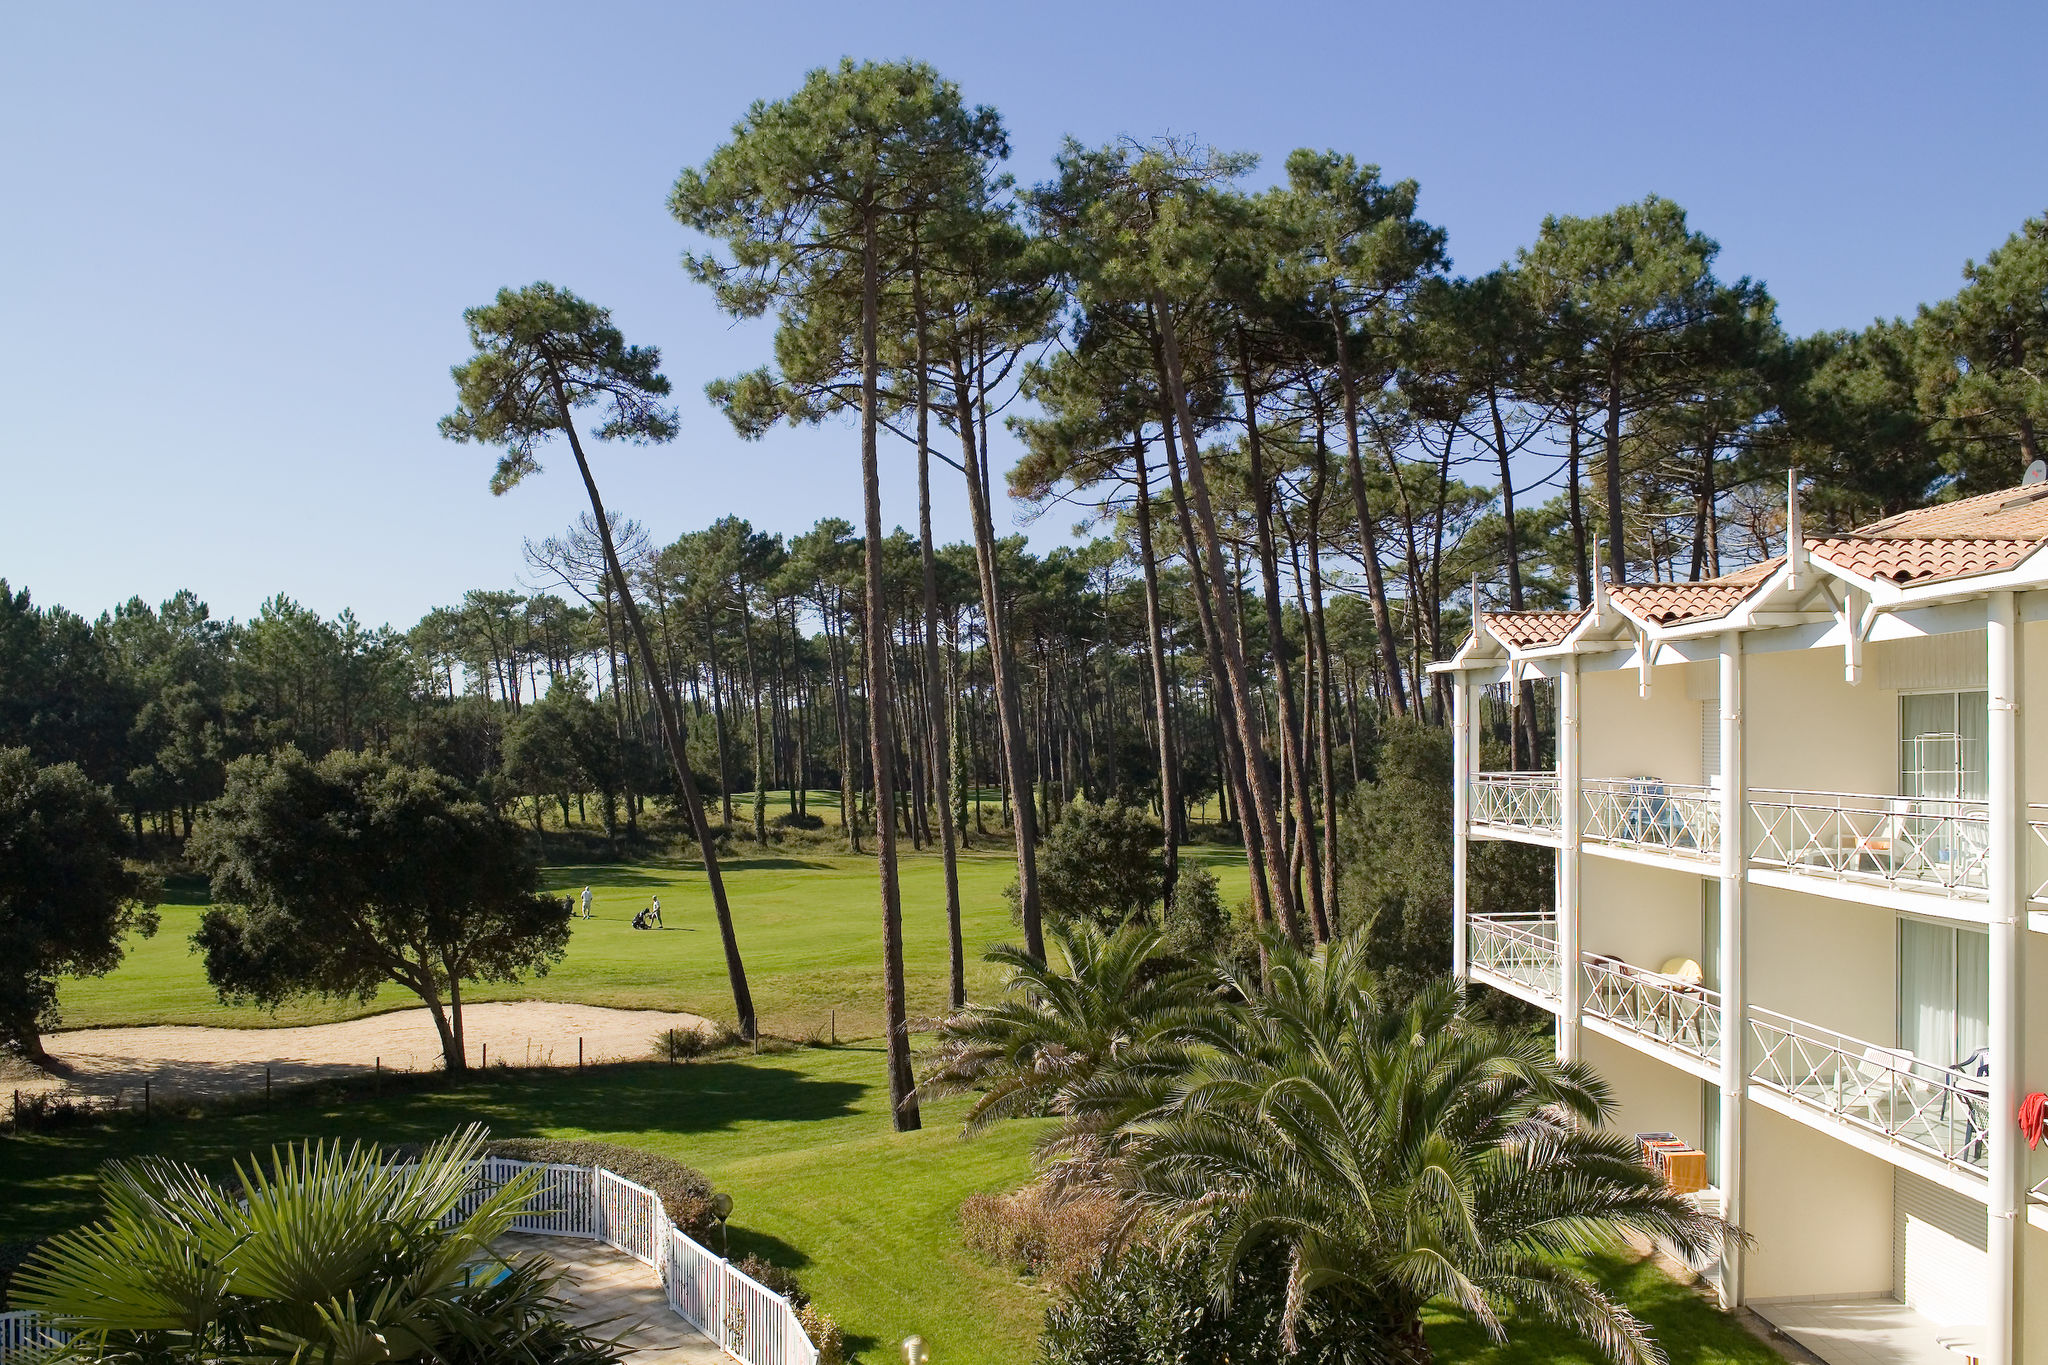 Nice apartment with a dishwasher to 700 m. from the beach